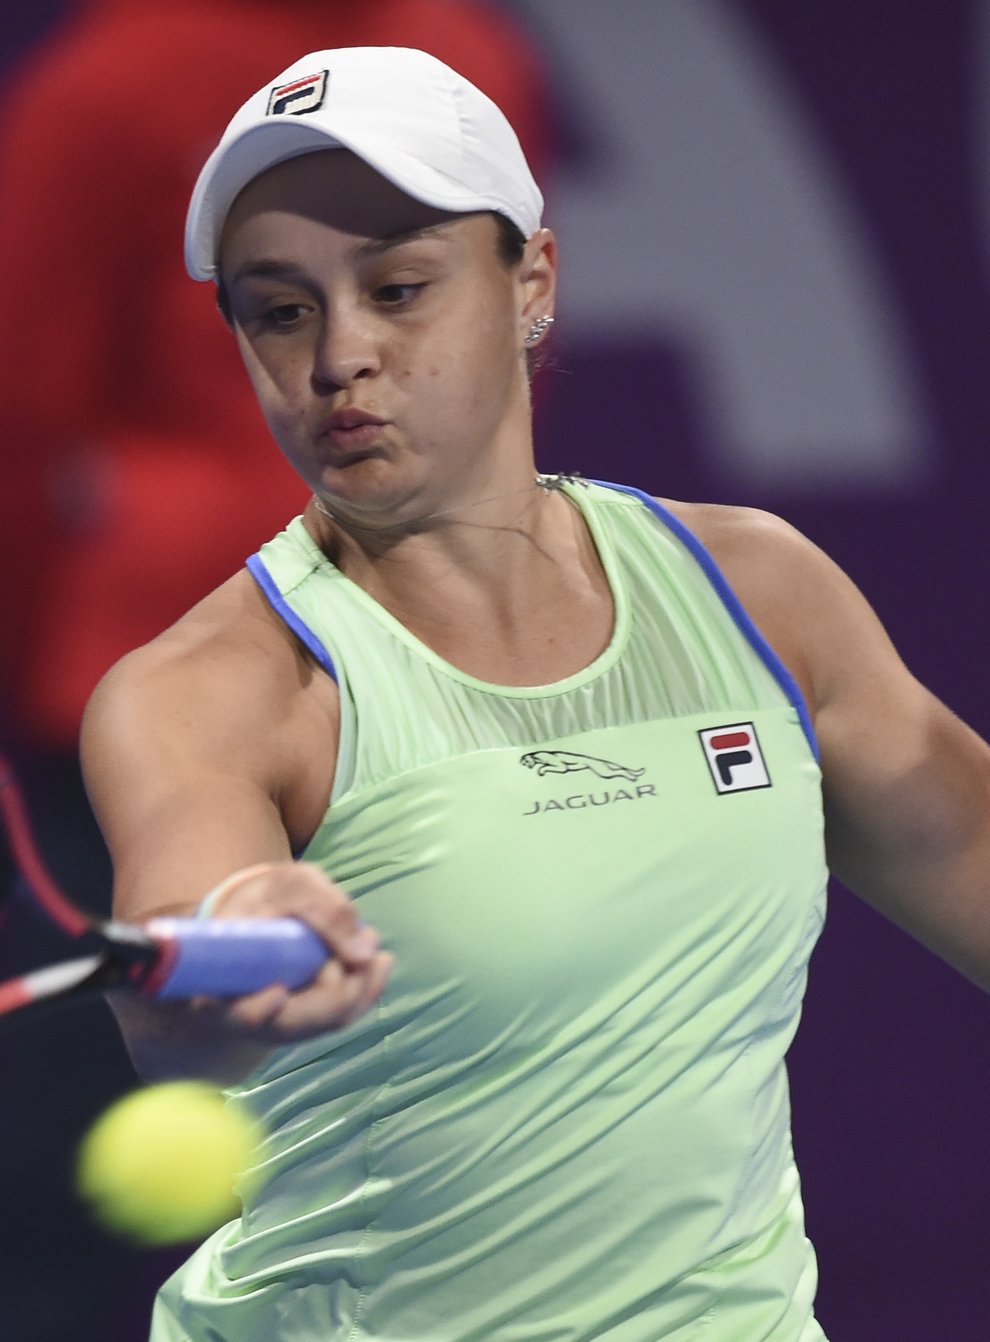 Barty showed why she is the current world No. 1 (PA Images)